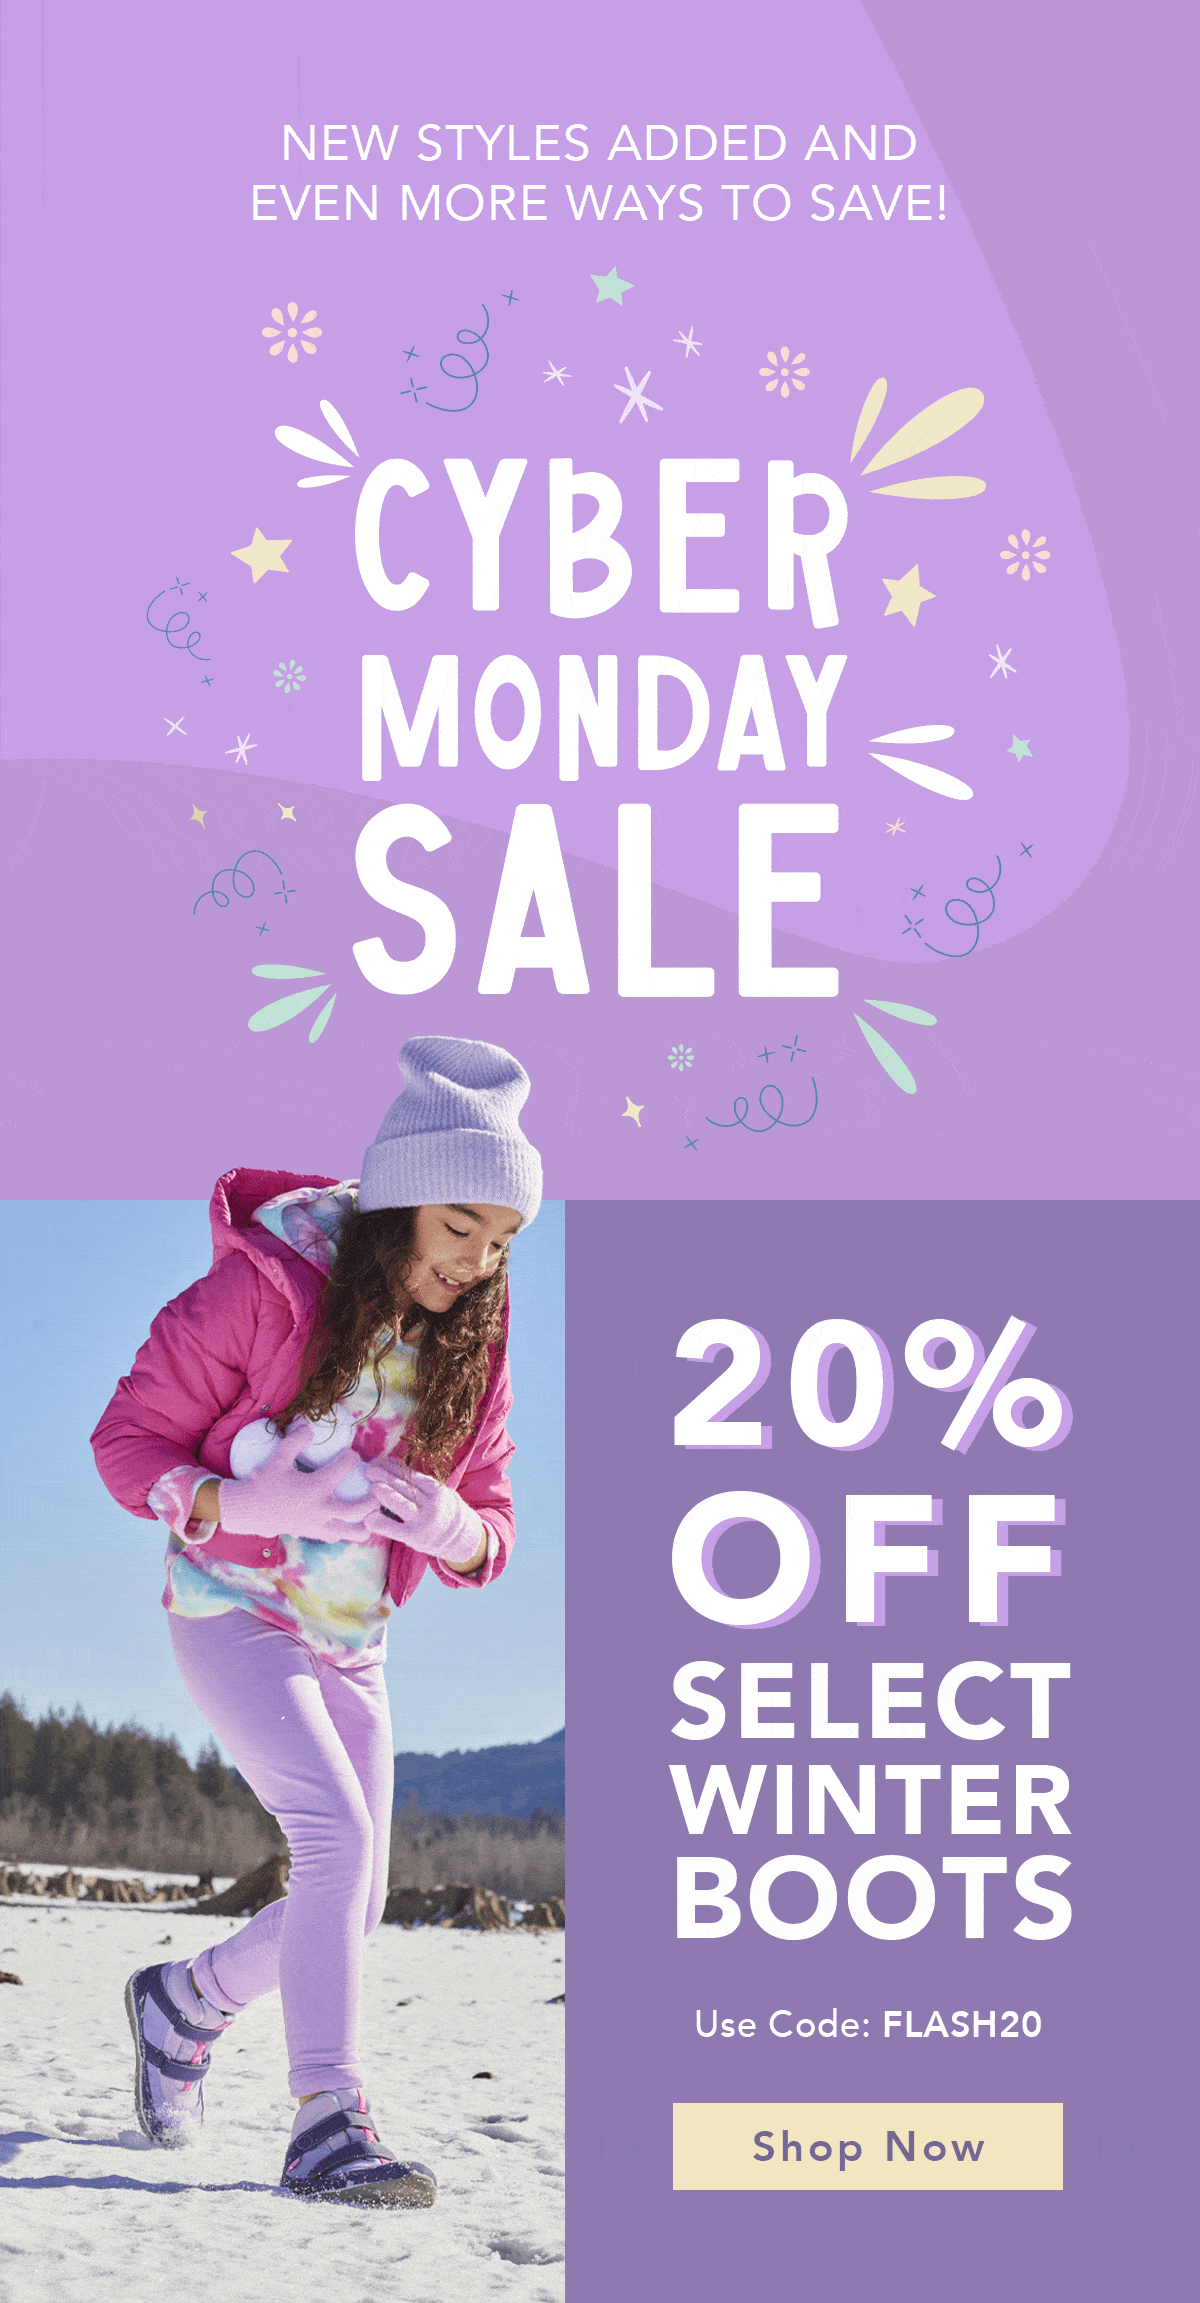 New Cyber Monday Styles On Sale!